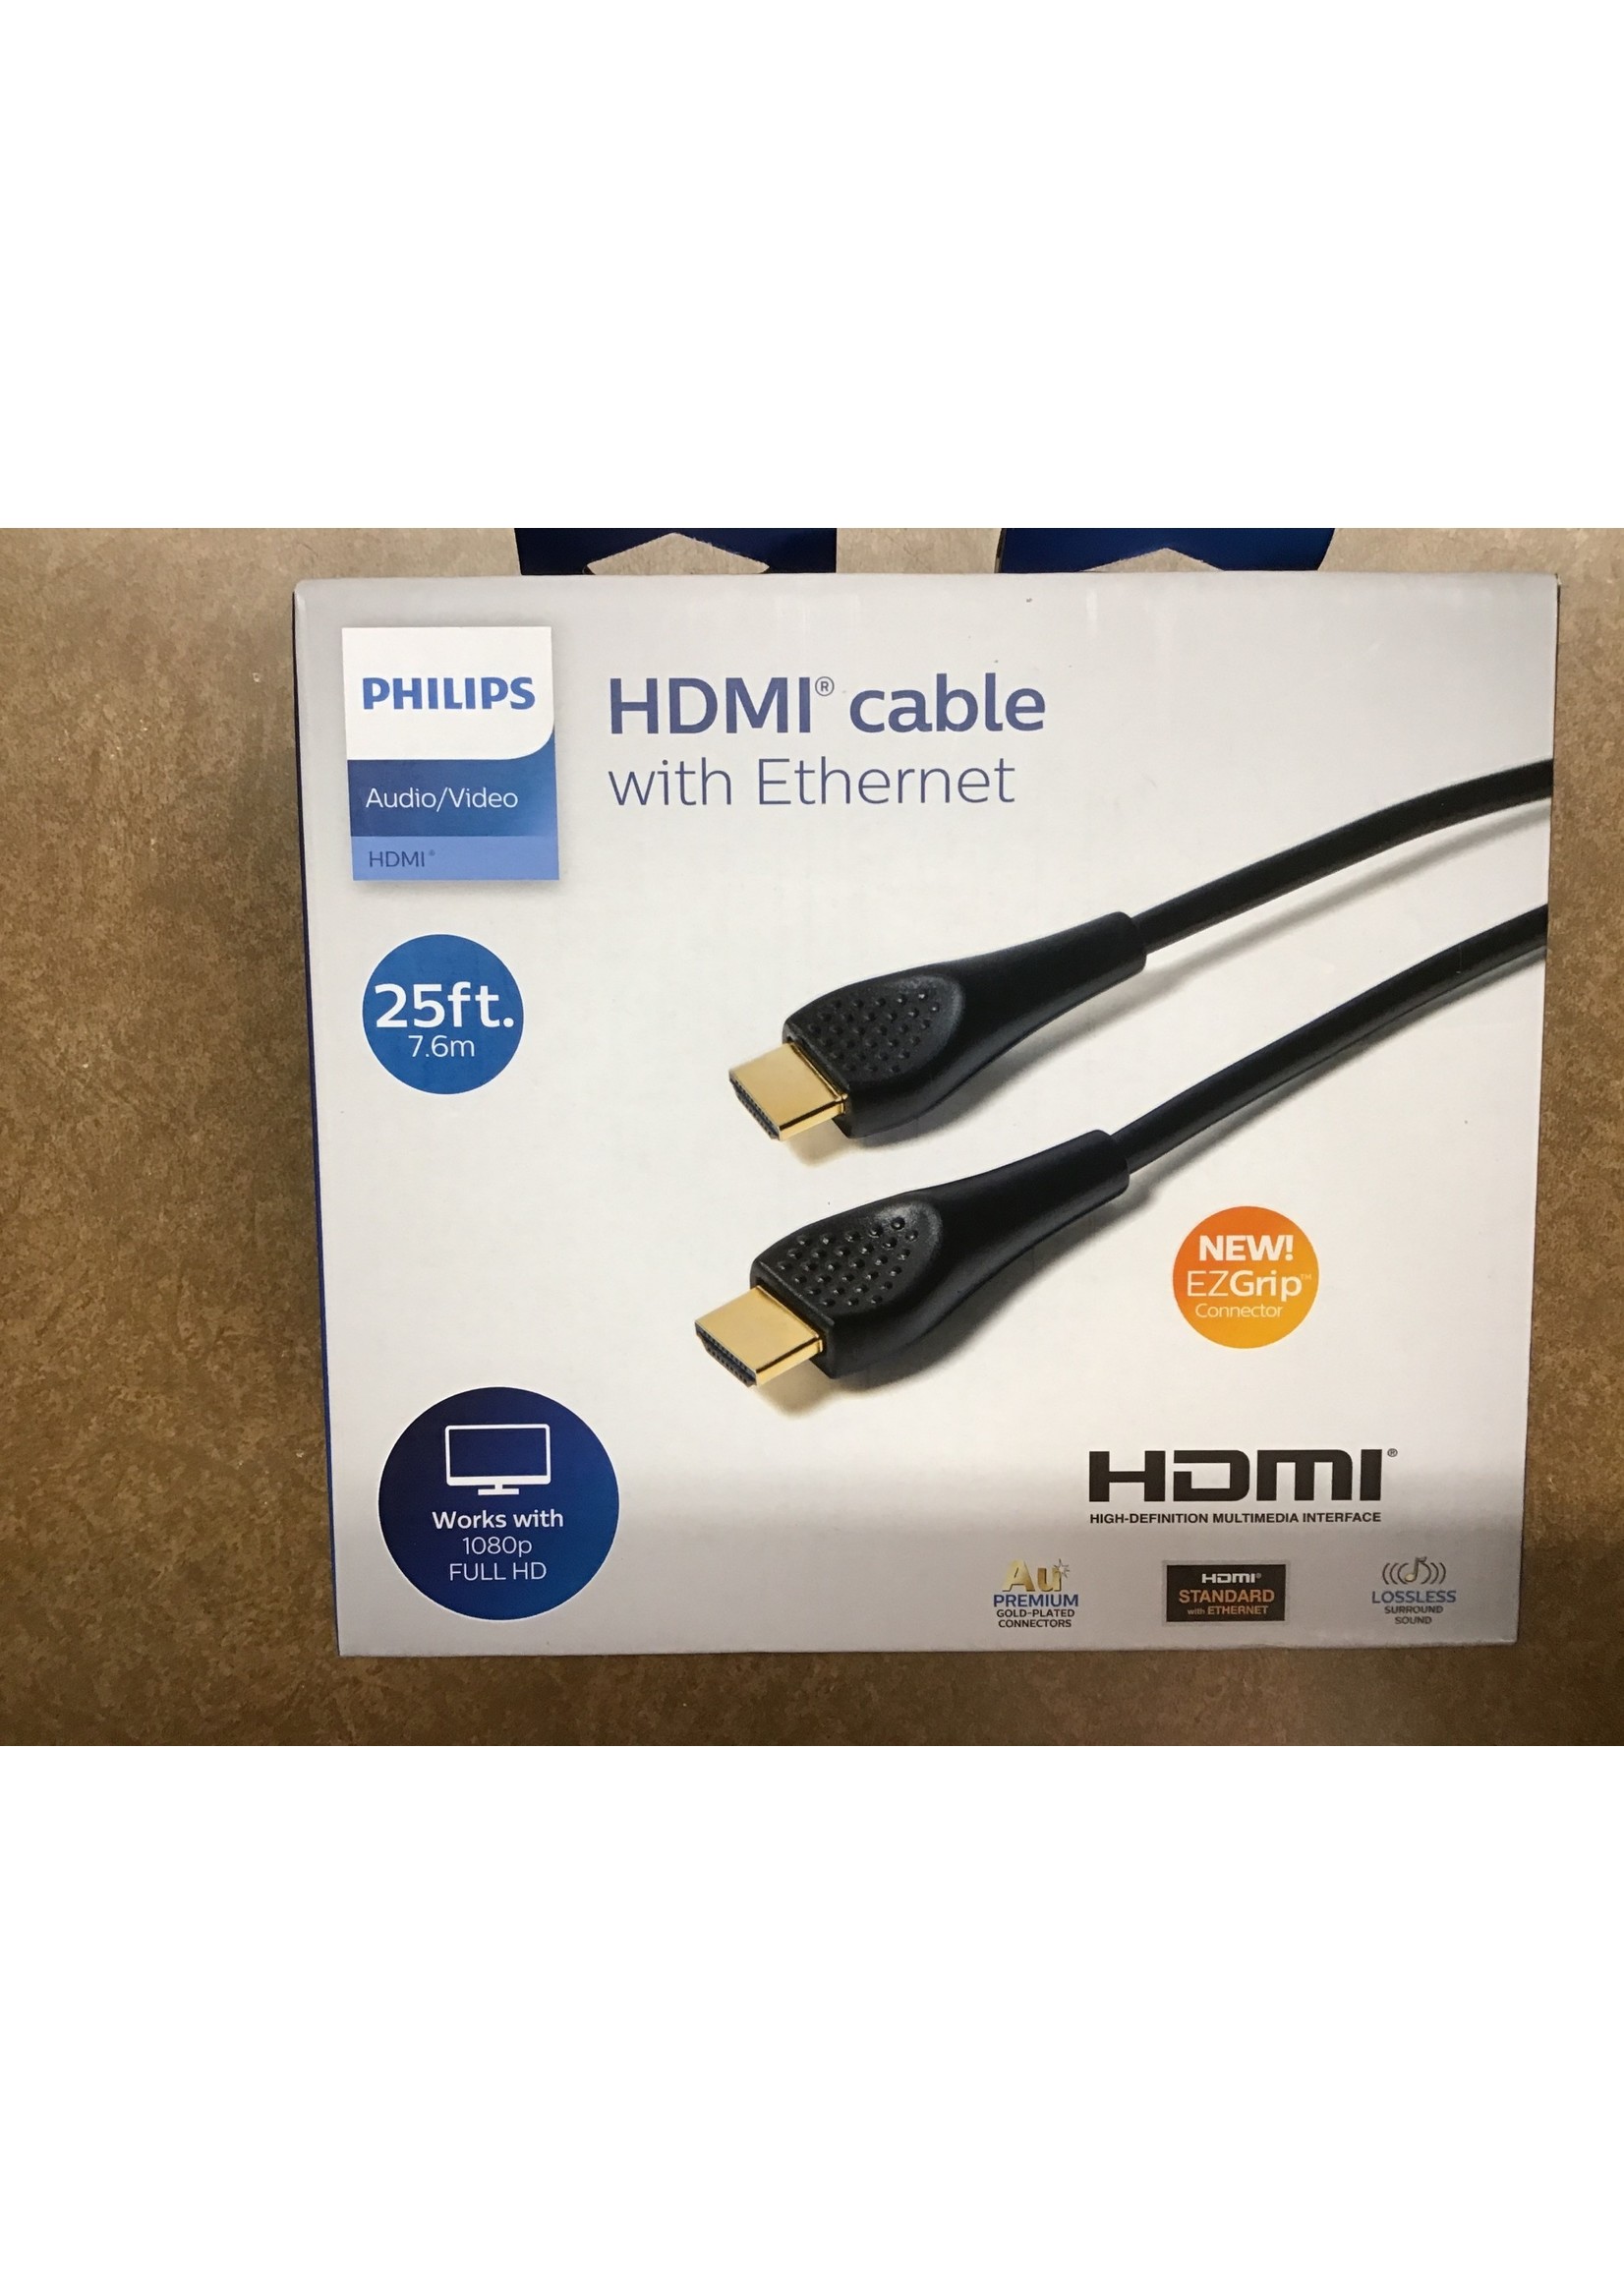 *opened* Philips 25' HDMI High Speed Cable with Ethernet - Black